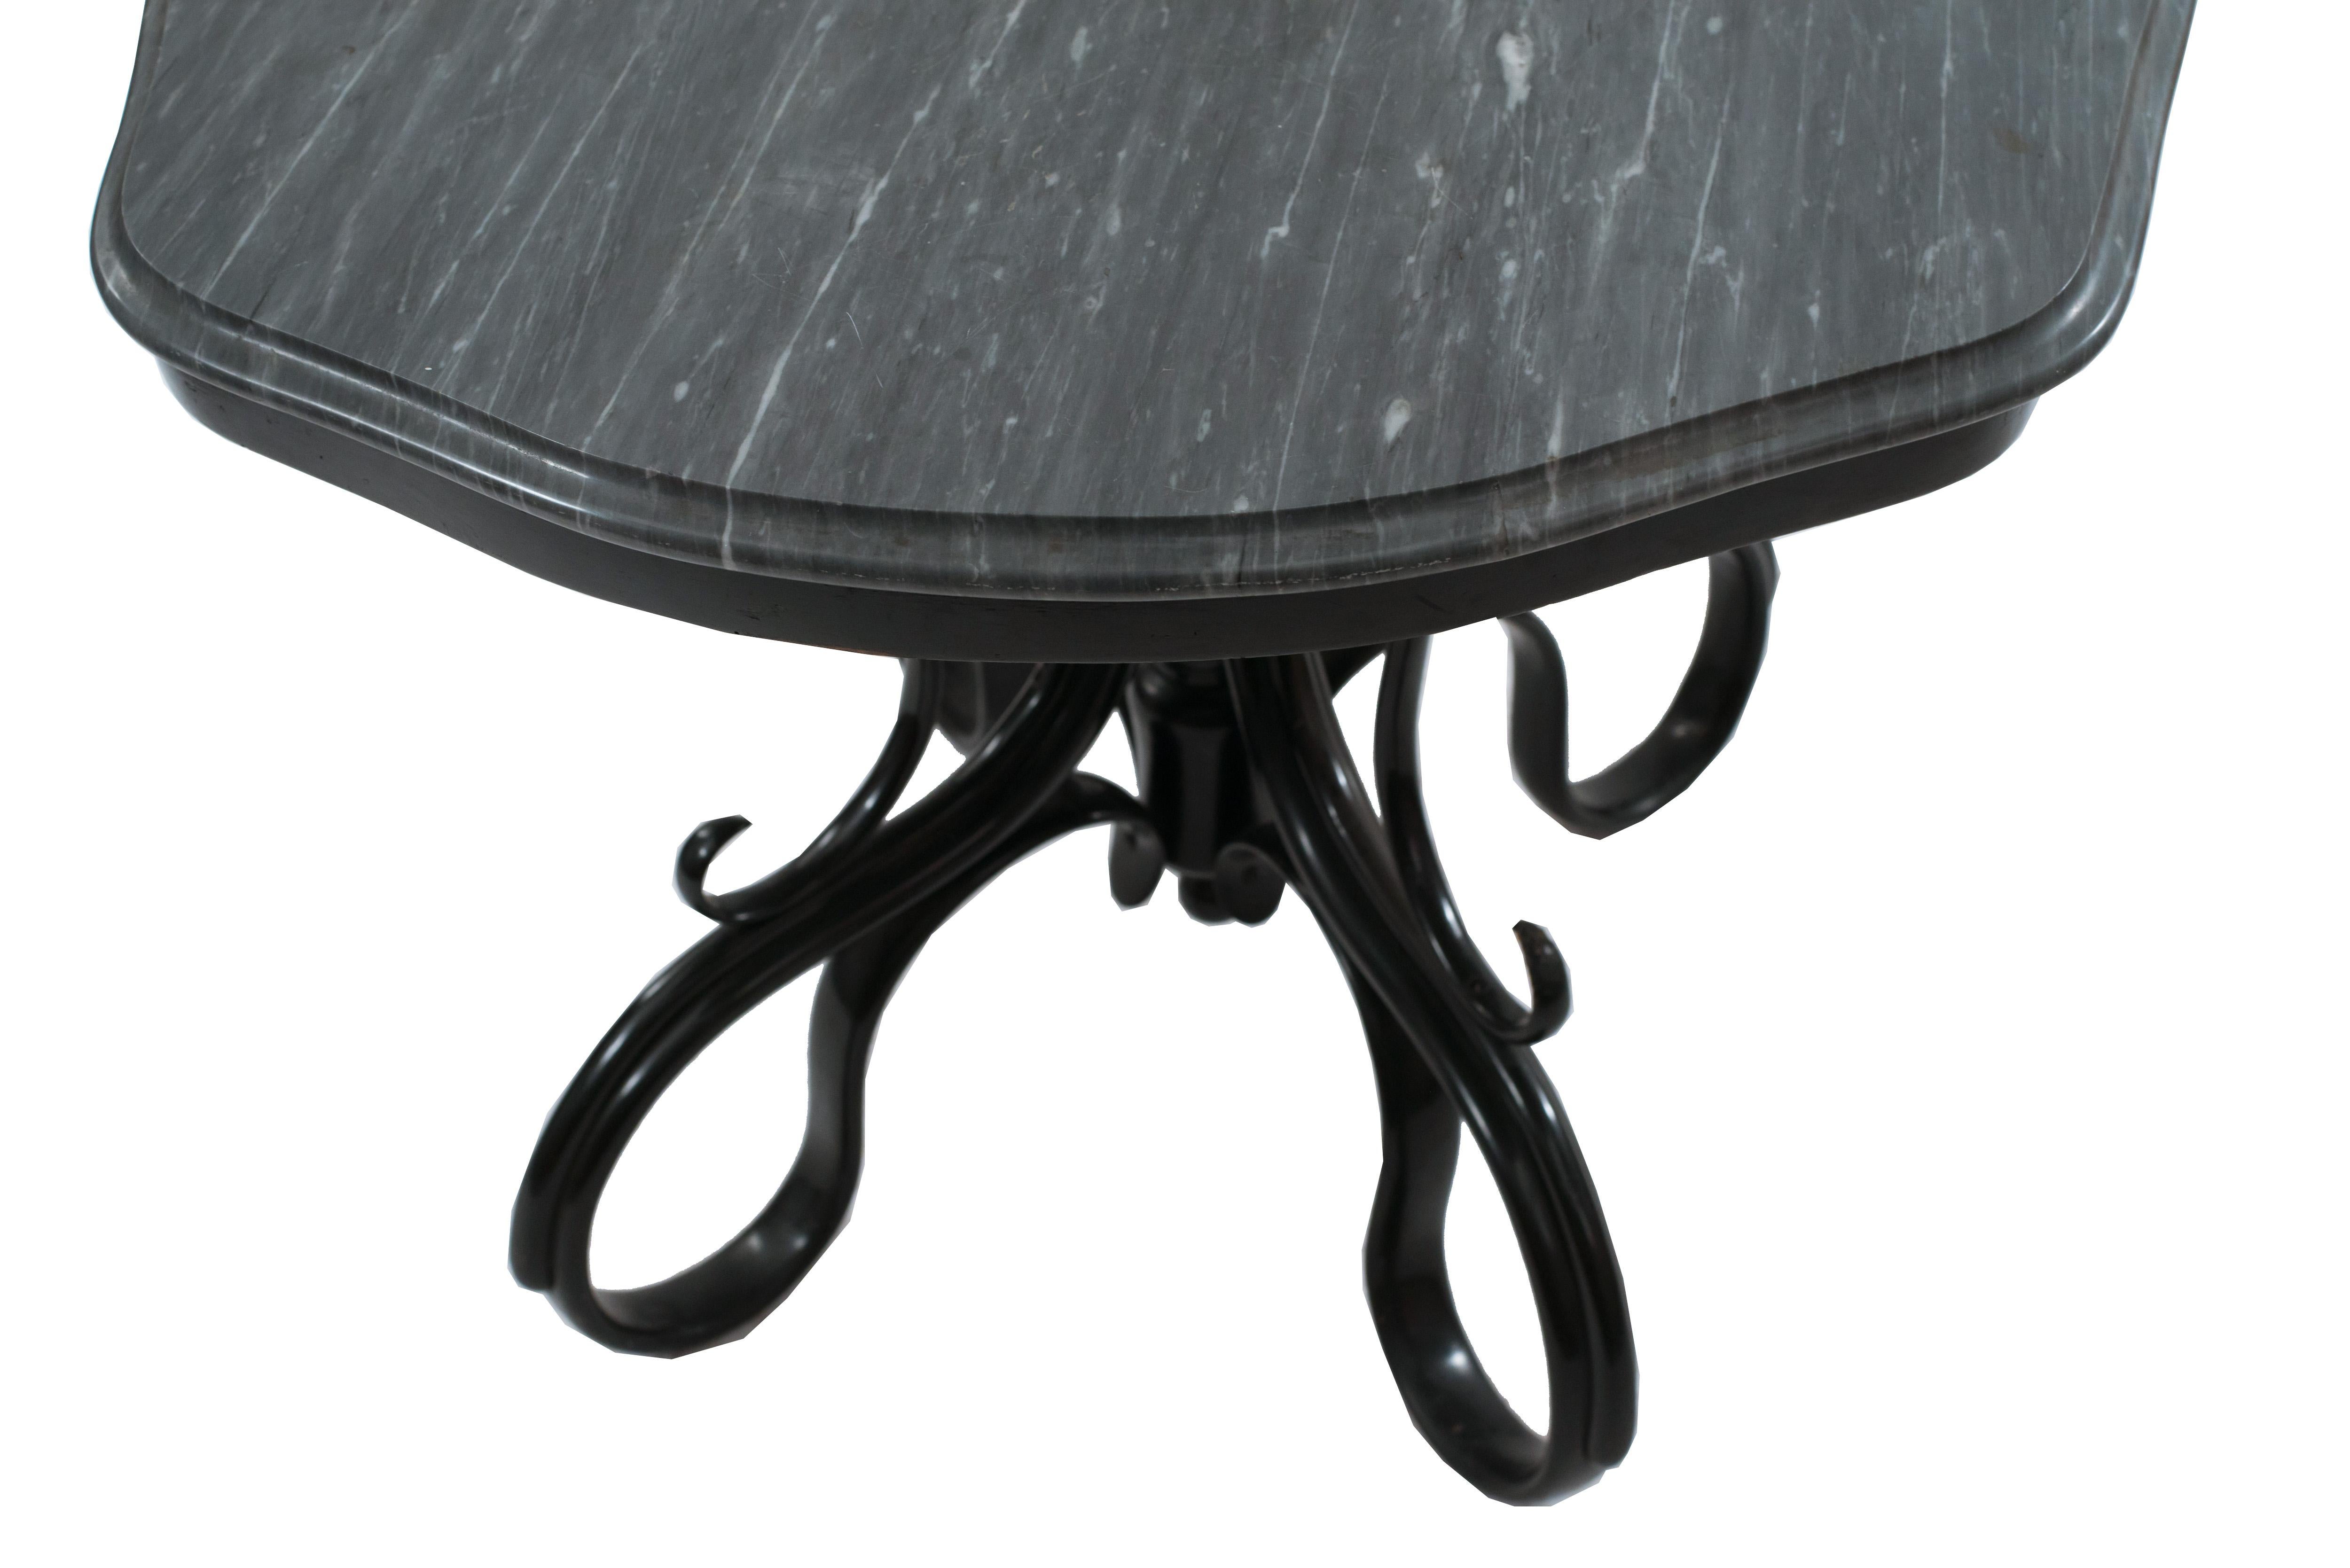 Austrian Bentwood (Late 19th Century) occasional /dining table with ebonized pedestal base and legs supporting a gray shaped rectangular marble top (MICHAEL THONET)
